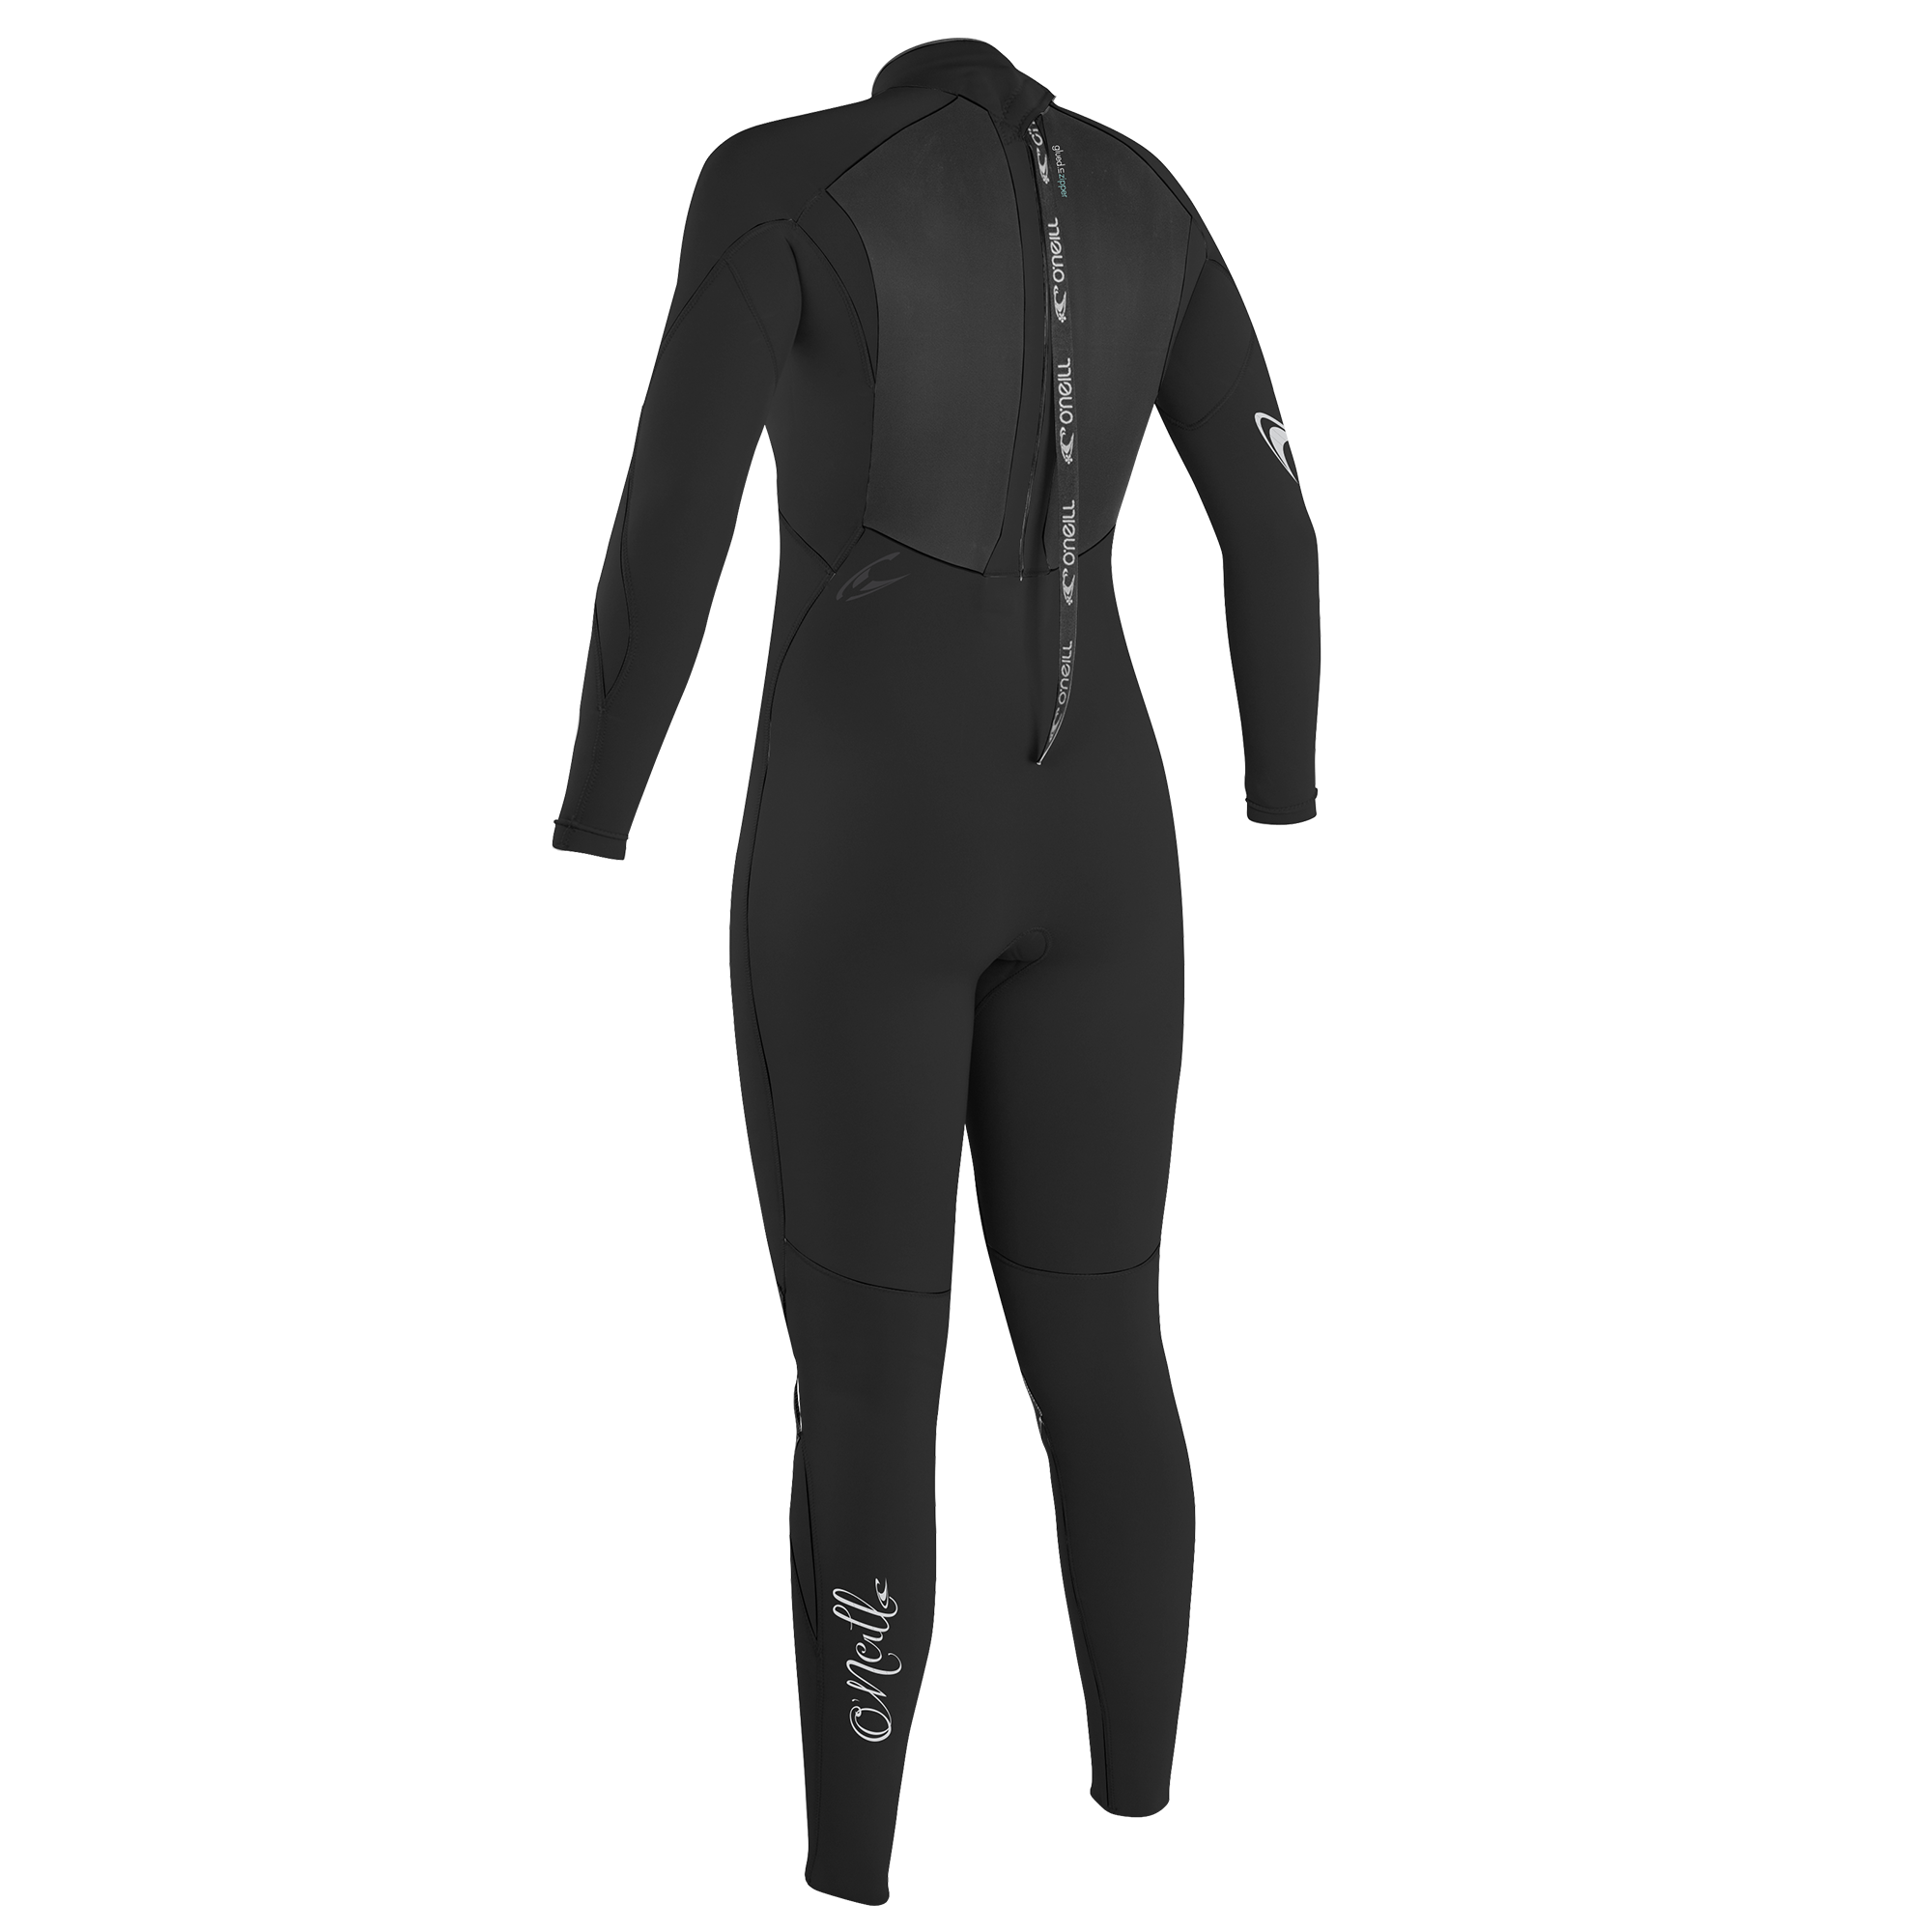 O'Neill Epic Back Zip Womens Wetsuit 4/3mm